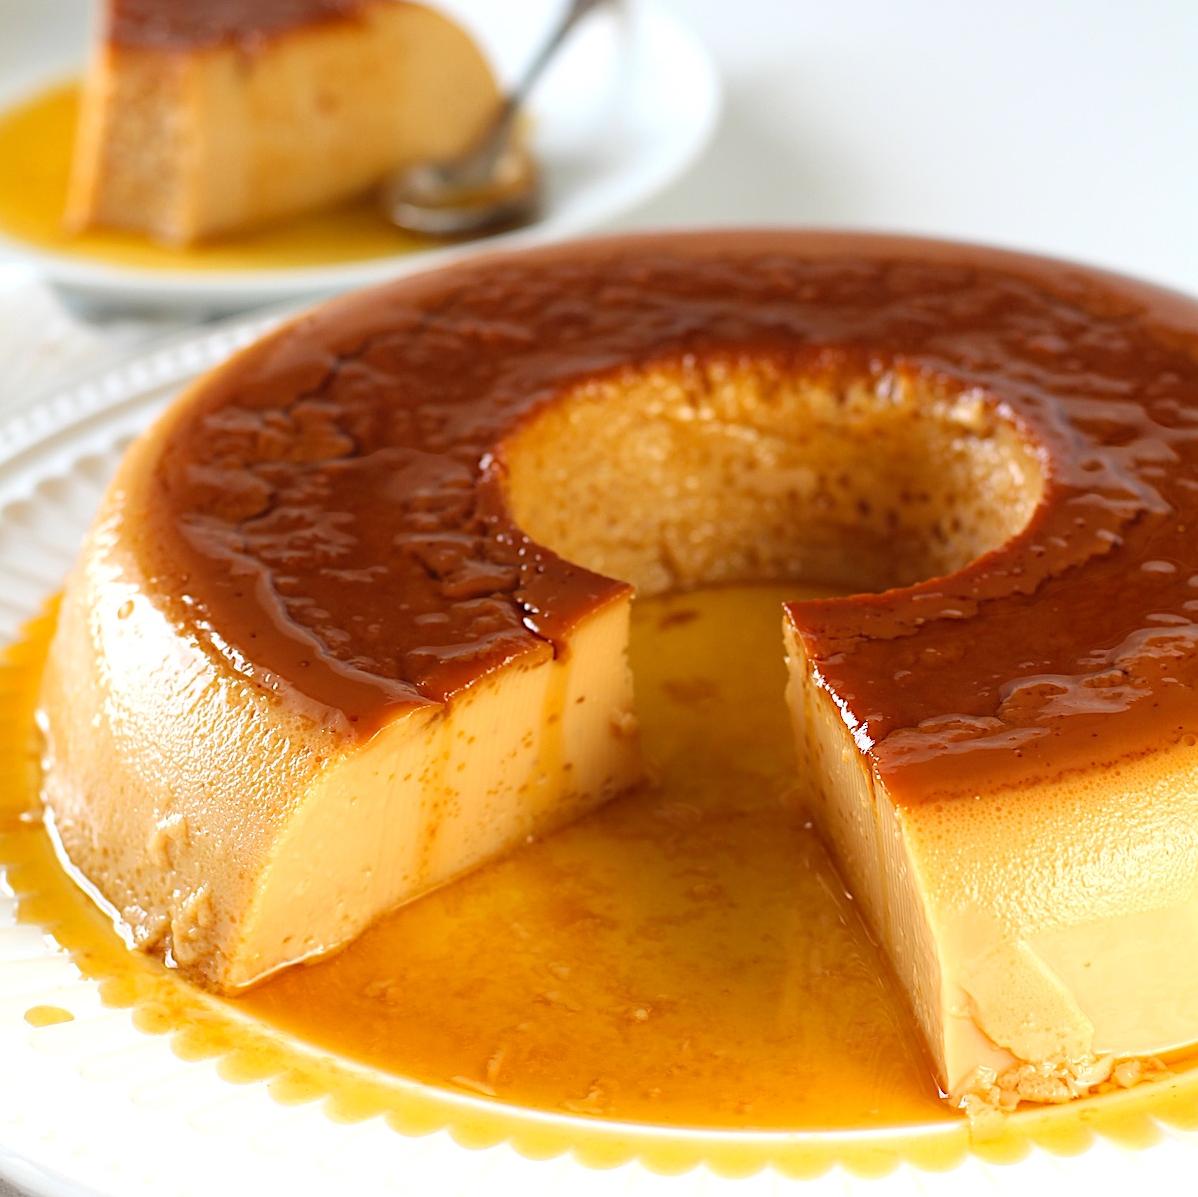  The caramel sauce adds a deep and rich flavor to the flan, just like eating soft caramel candies.